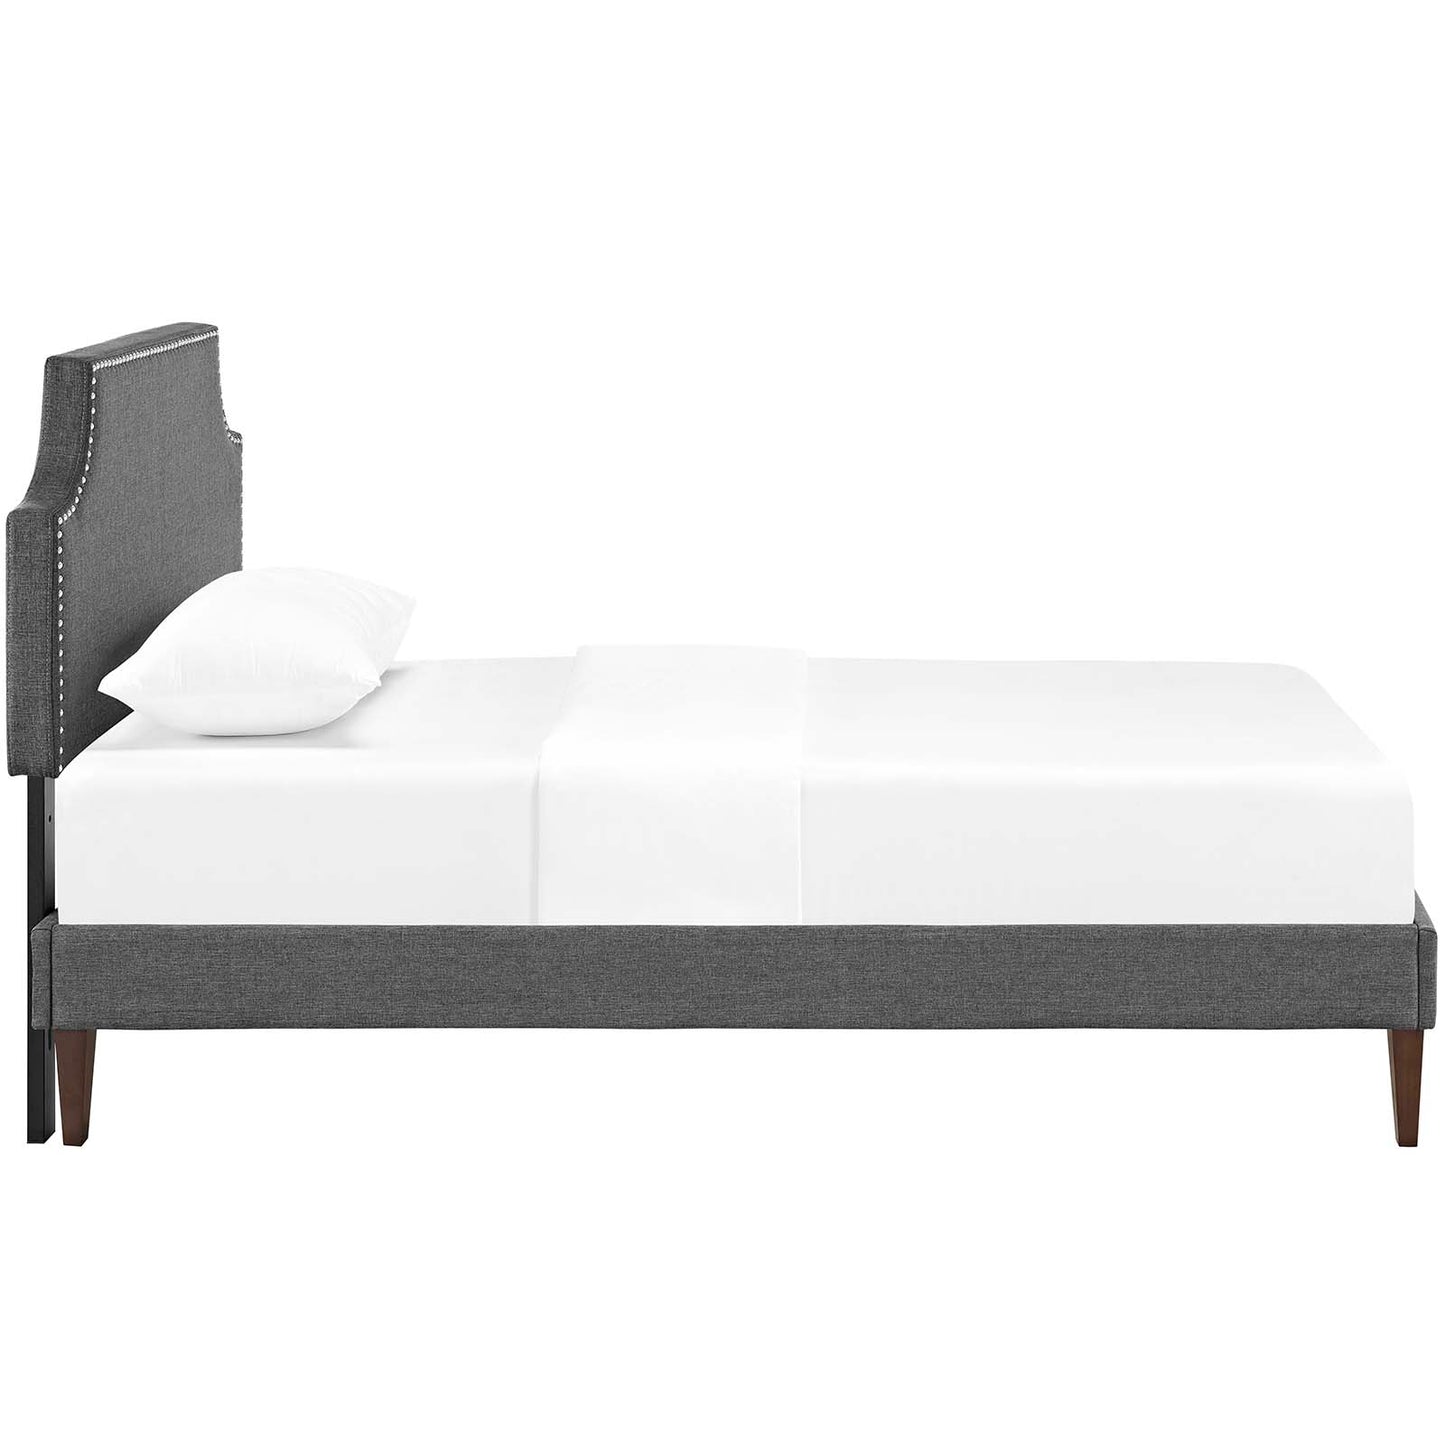 Corene Twin Fabric Platform Bed with Squared Tapered Legs Gray MOD-5951-GRY